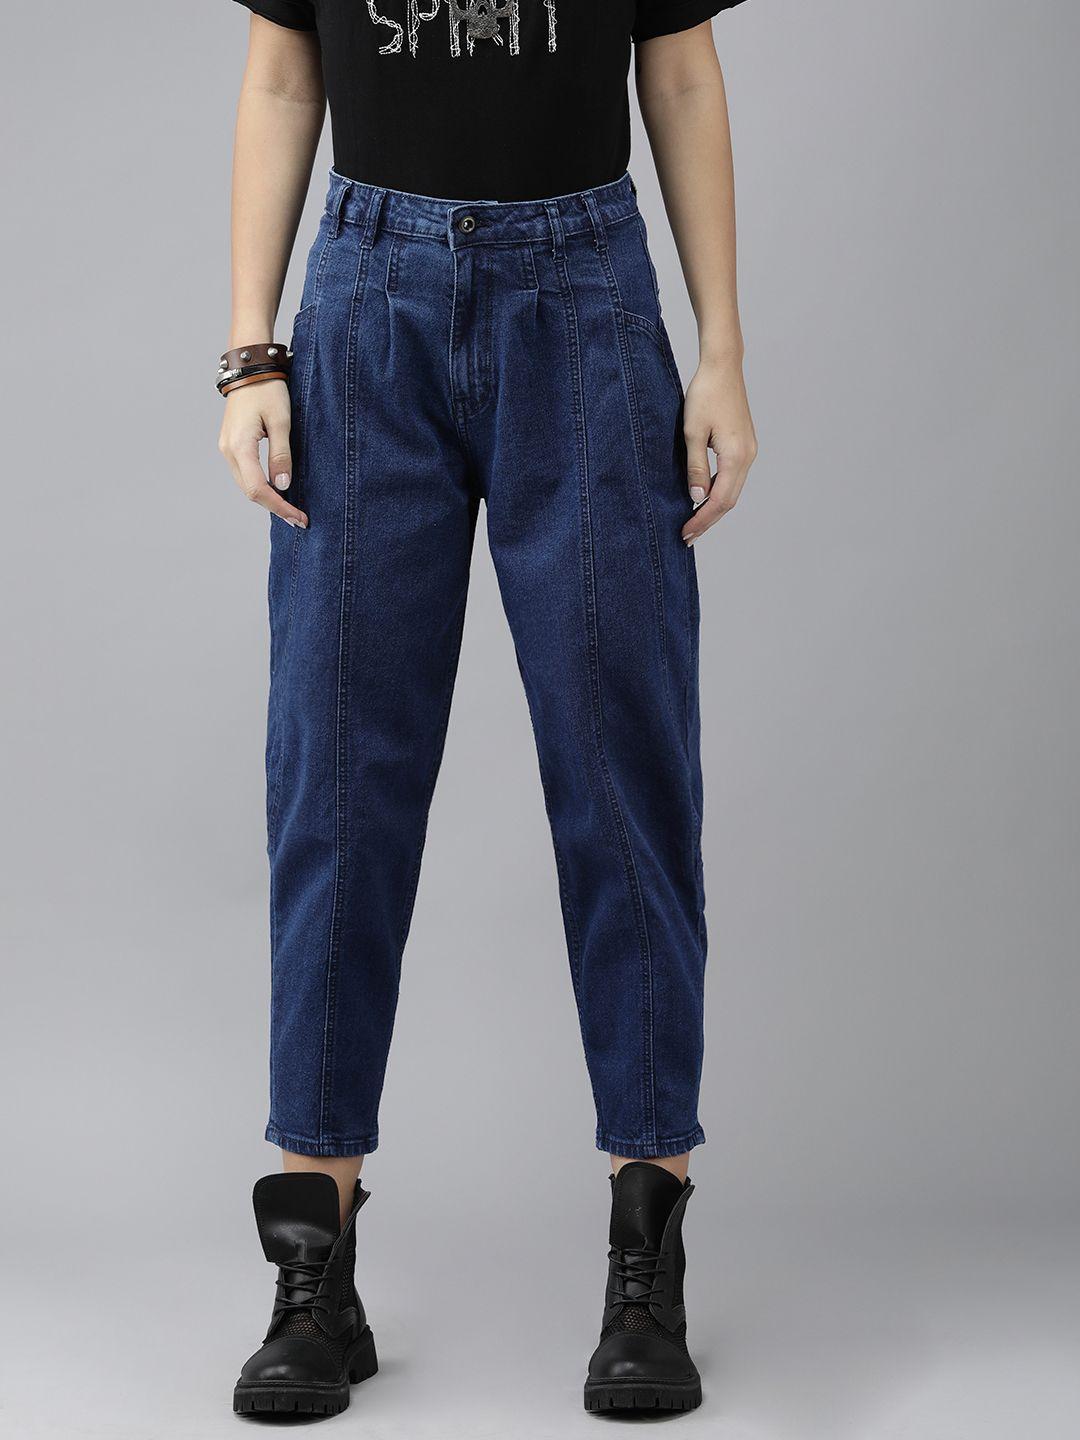 roadster-women-blue-solid-mid-rise-slouchy-cropped-jeans